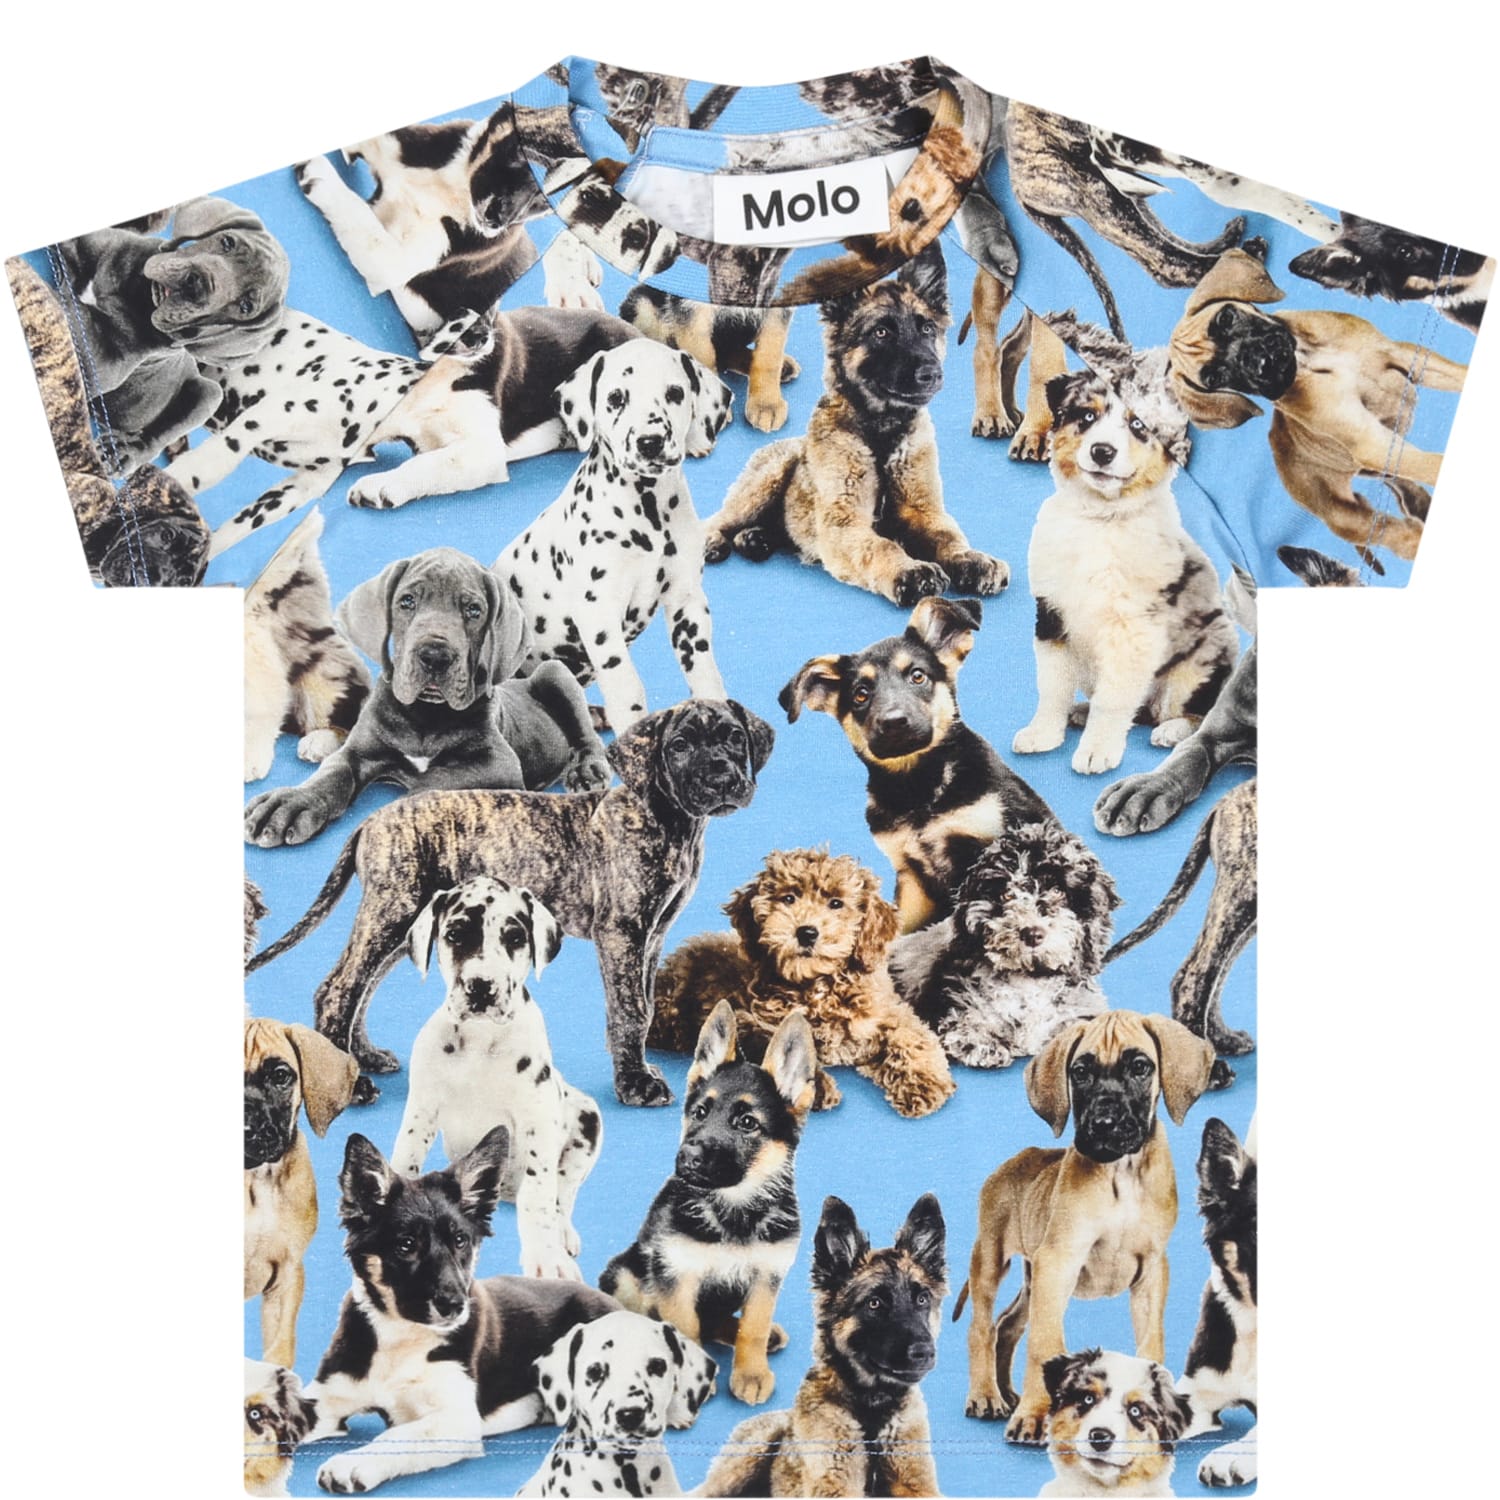 Molo Light-blue T-shirt For Babyb Boy With Dogs